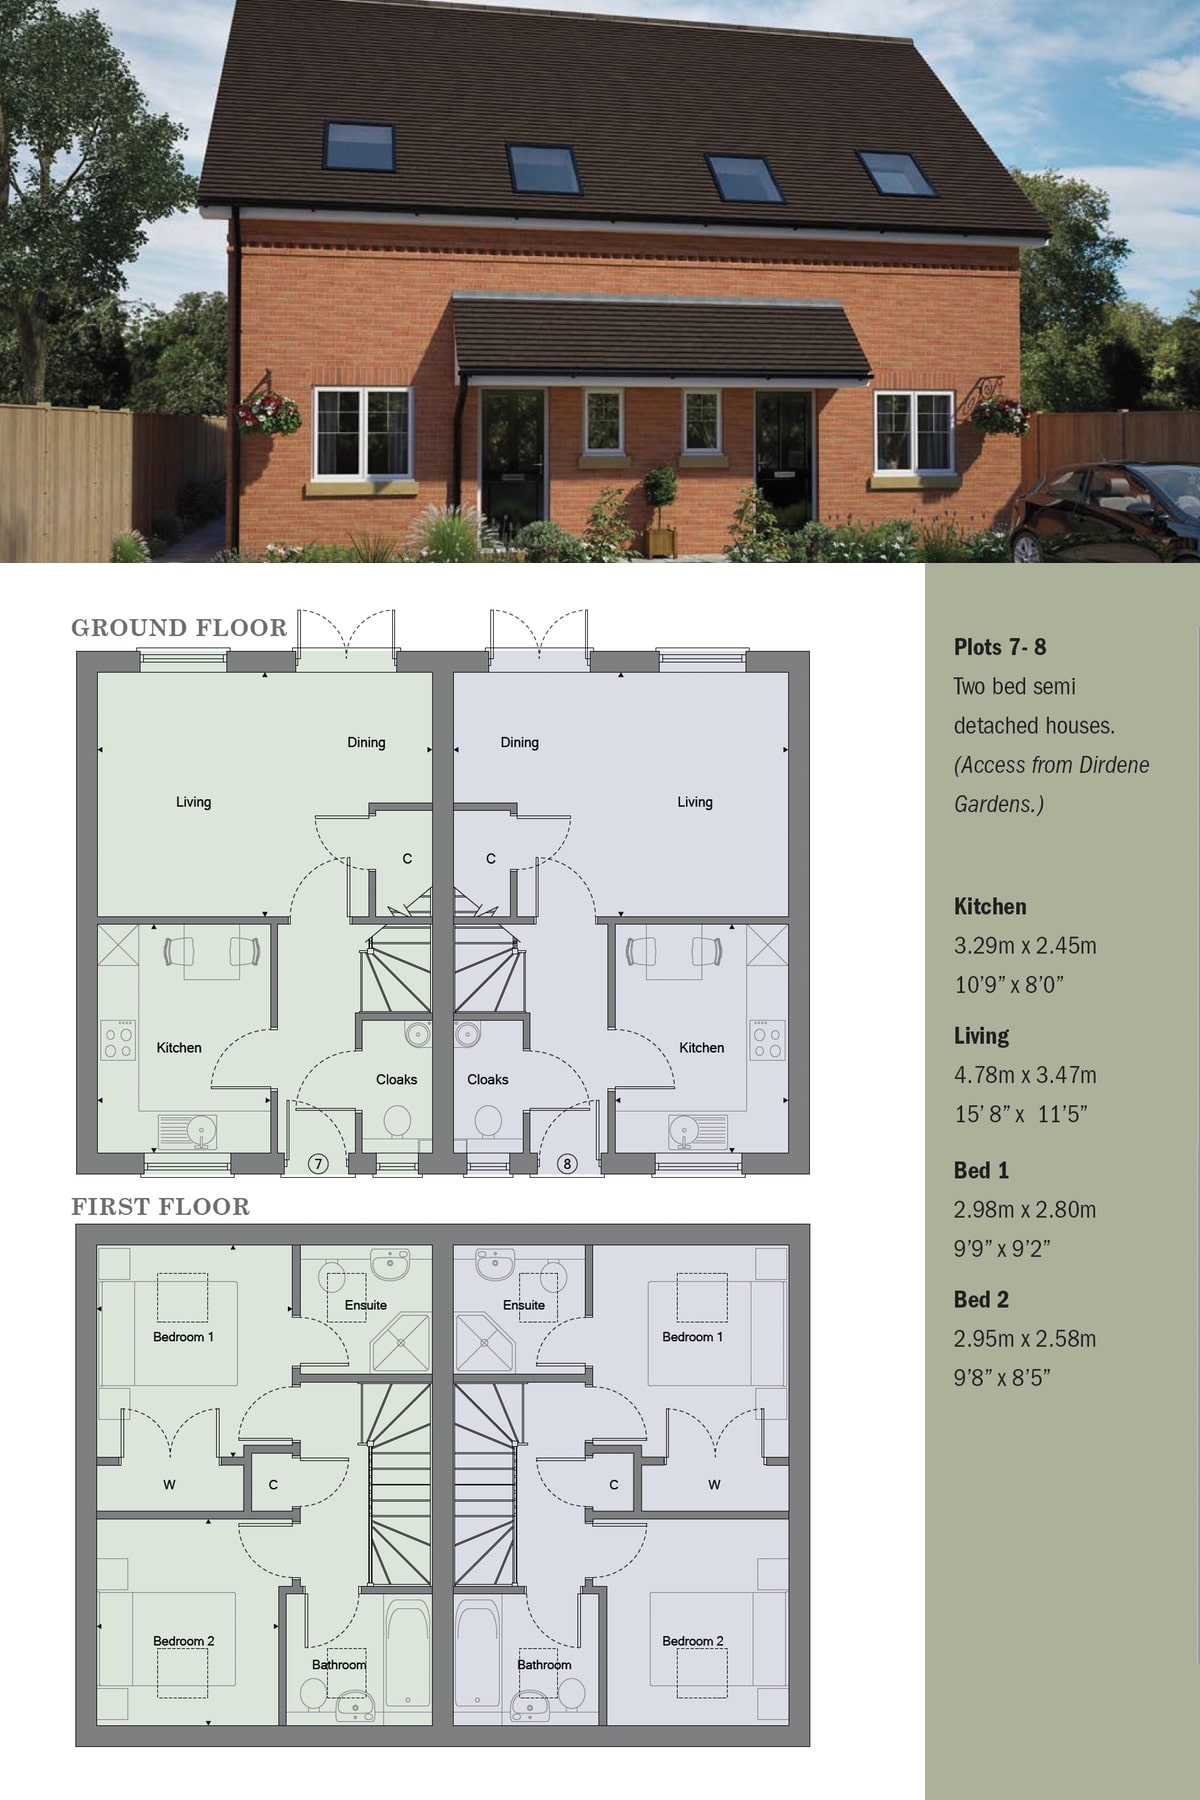 Details for a semi detached house in Chossy Place, a new property for sale in Surrey from Oakton Developments Ltd